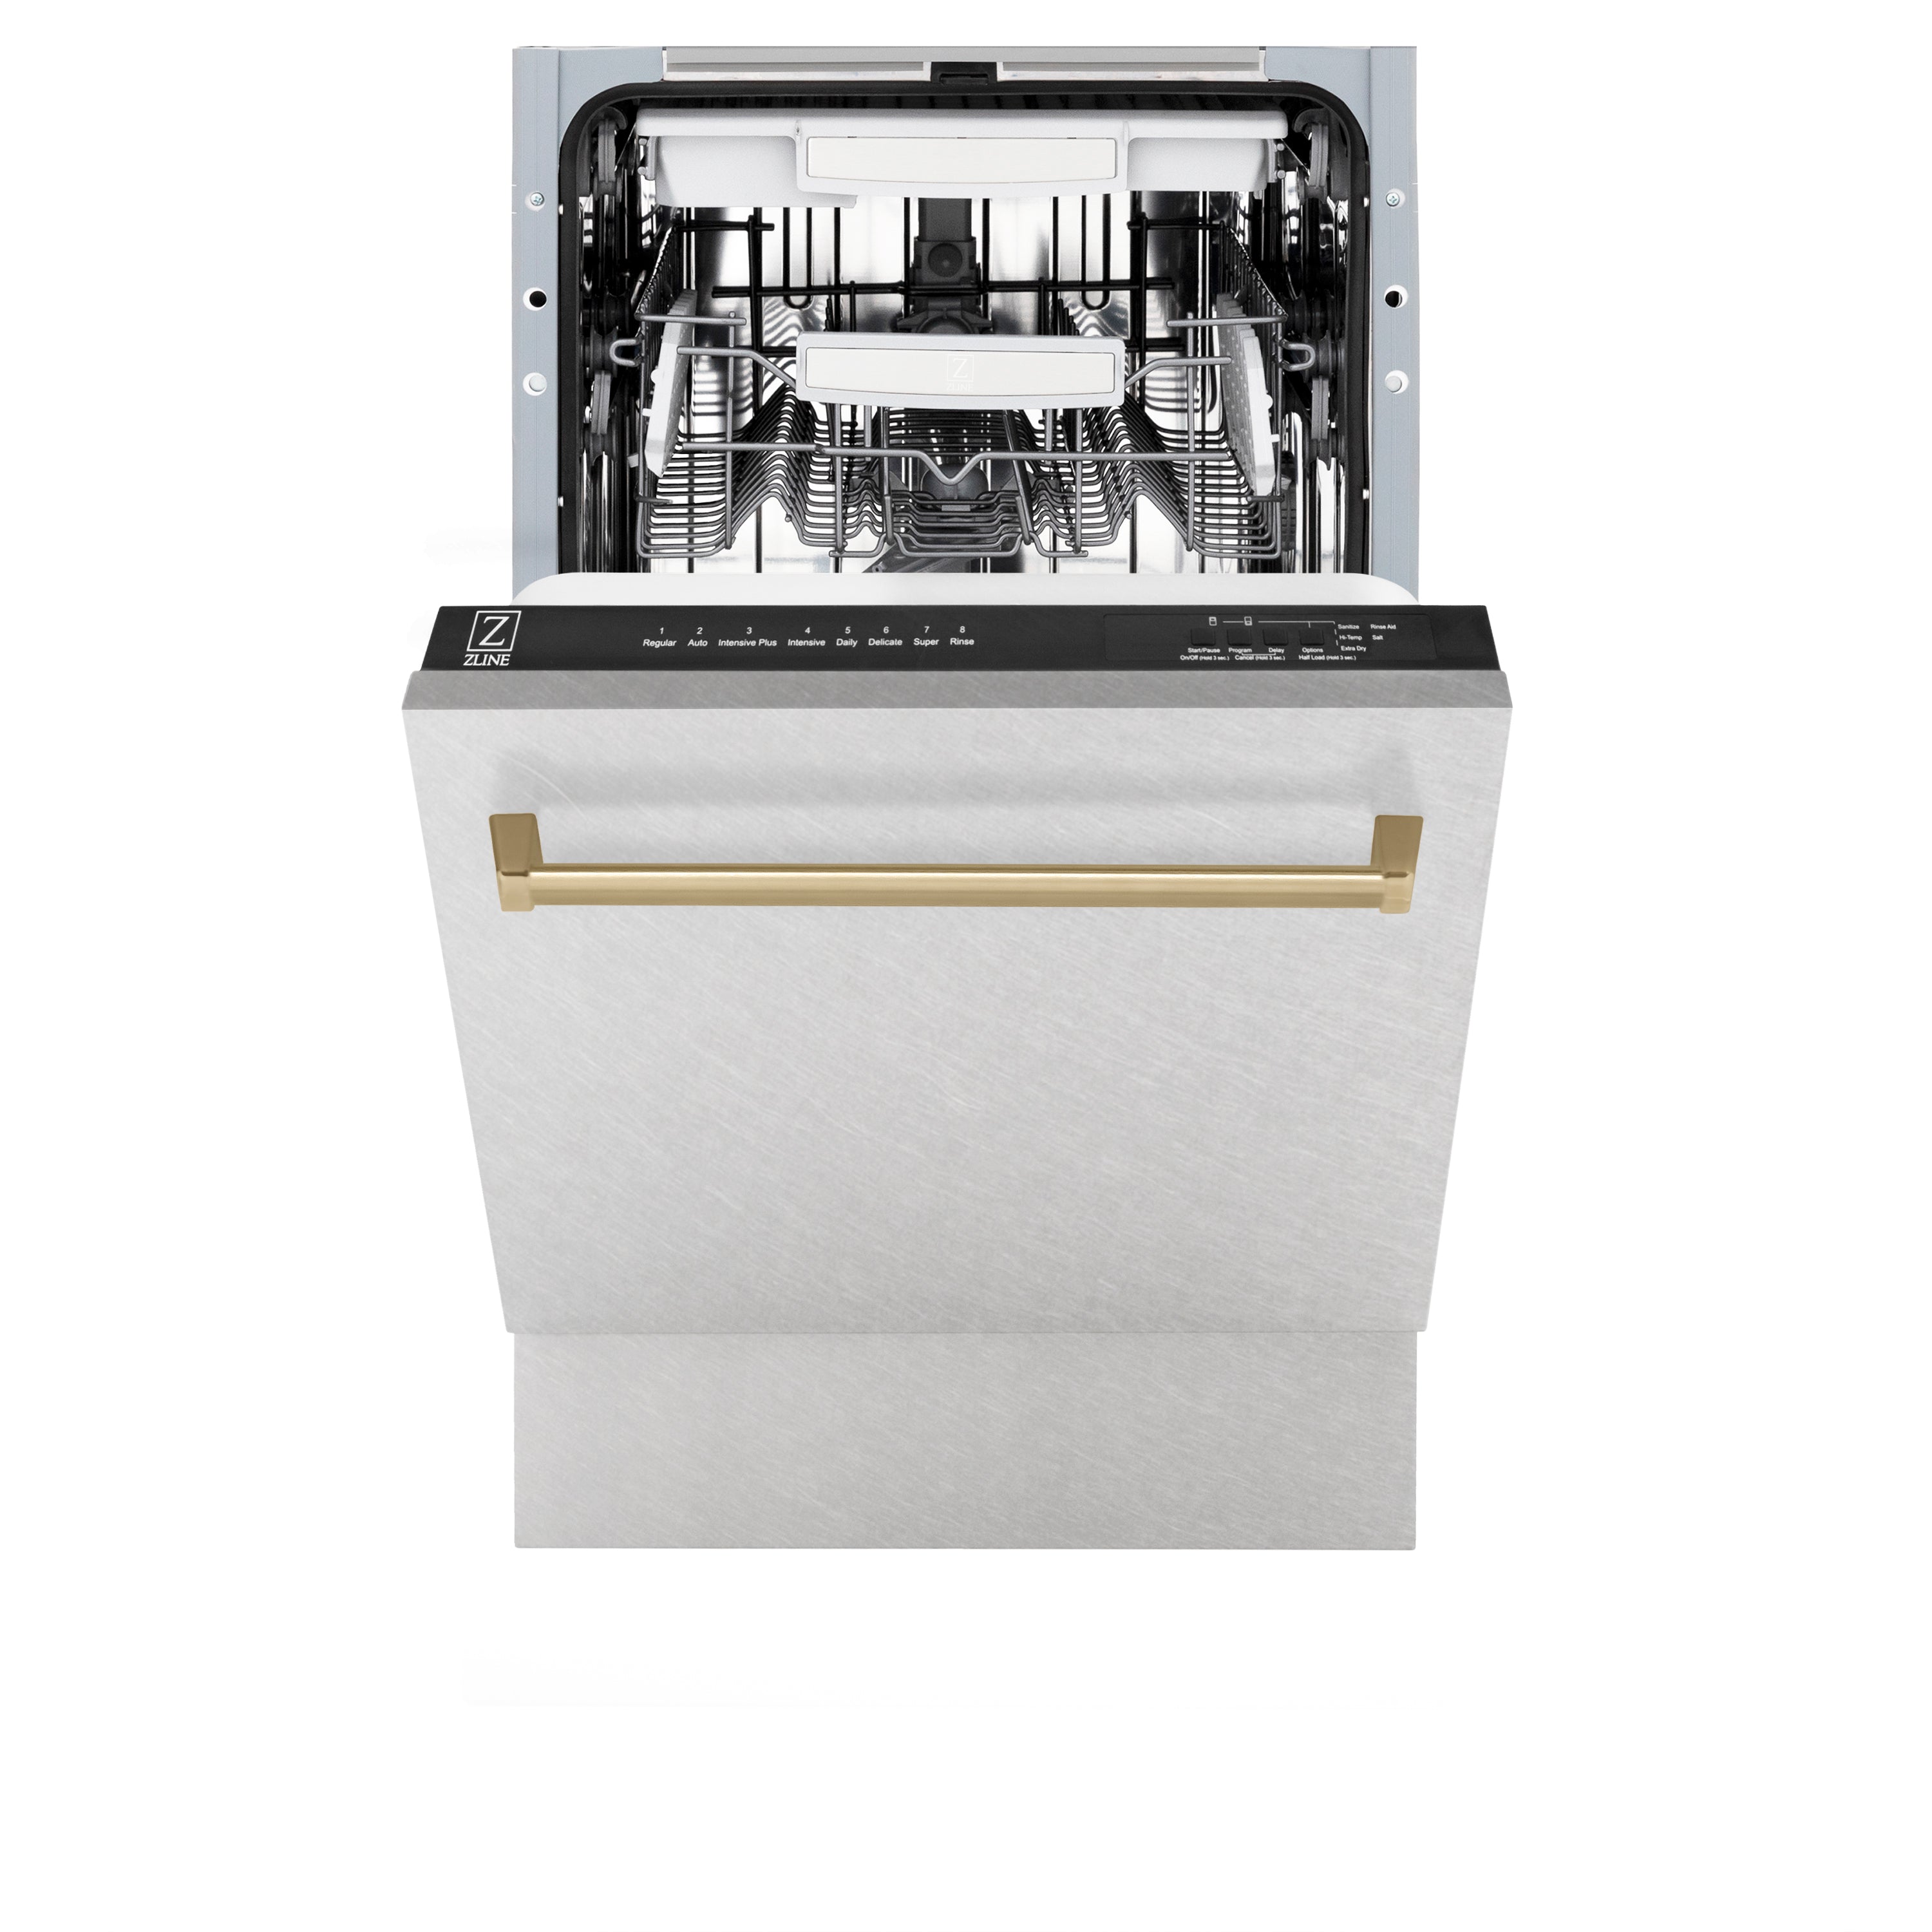 ZLINE Autograph Edition 18" Compact 3rd Rack Top Control Dishwasher in Fingerprint Resistant Stainless Steel with Champagne Bronze Handle, 51dBa (DWVZ-SN-18-CB)